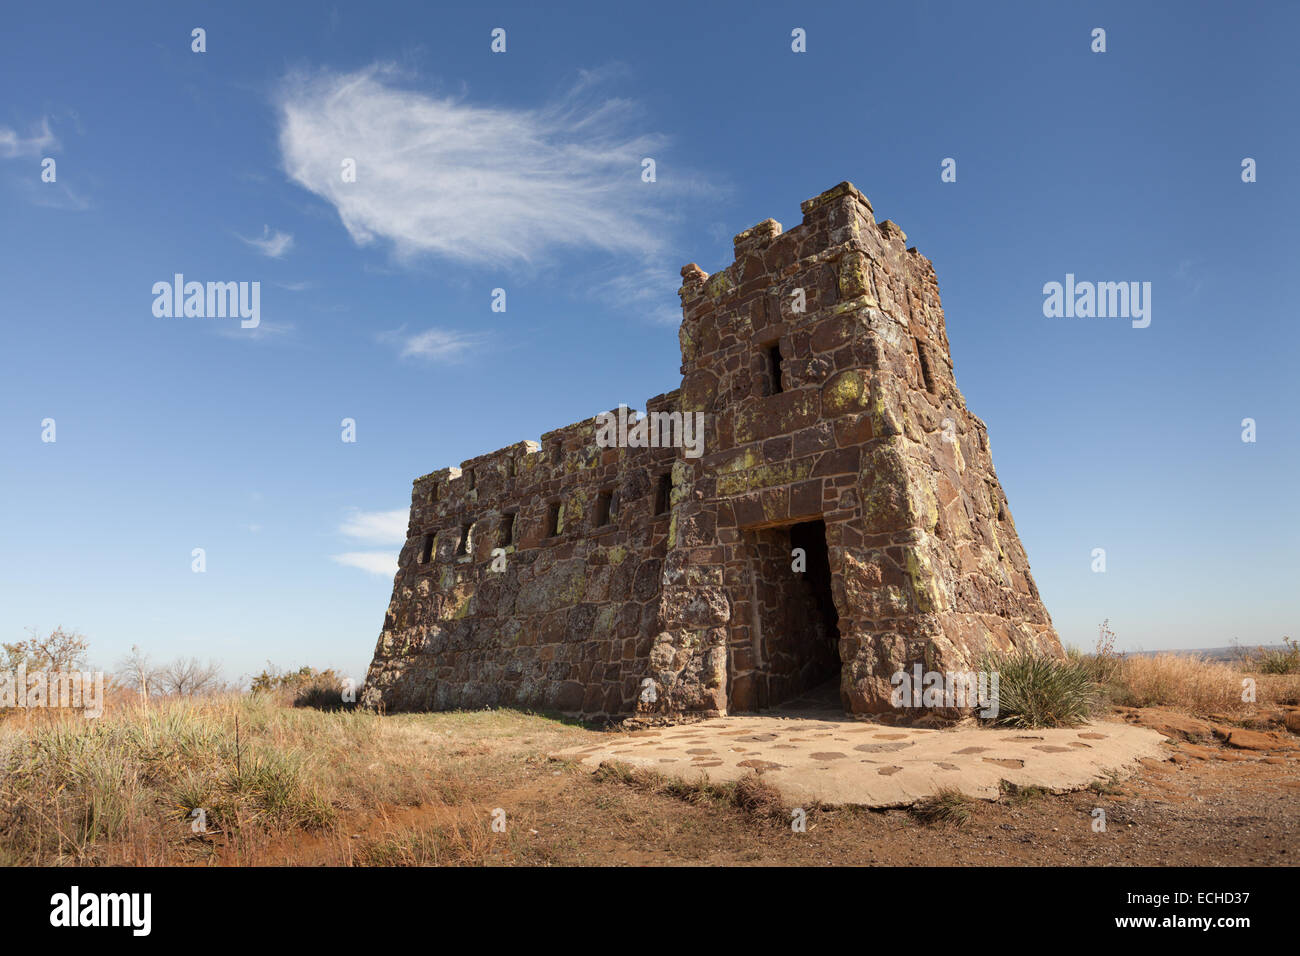 Coronado Heights near Lindsborg Kansas, USA, where Coronado ended his search for Seven Cities of Gold and returned to Mexico. Stock Photo